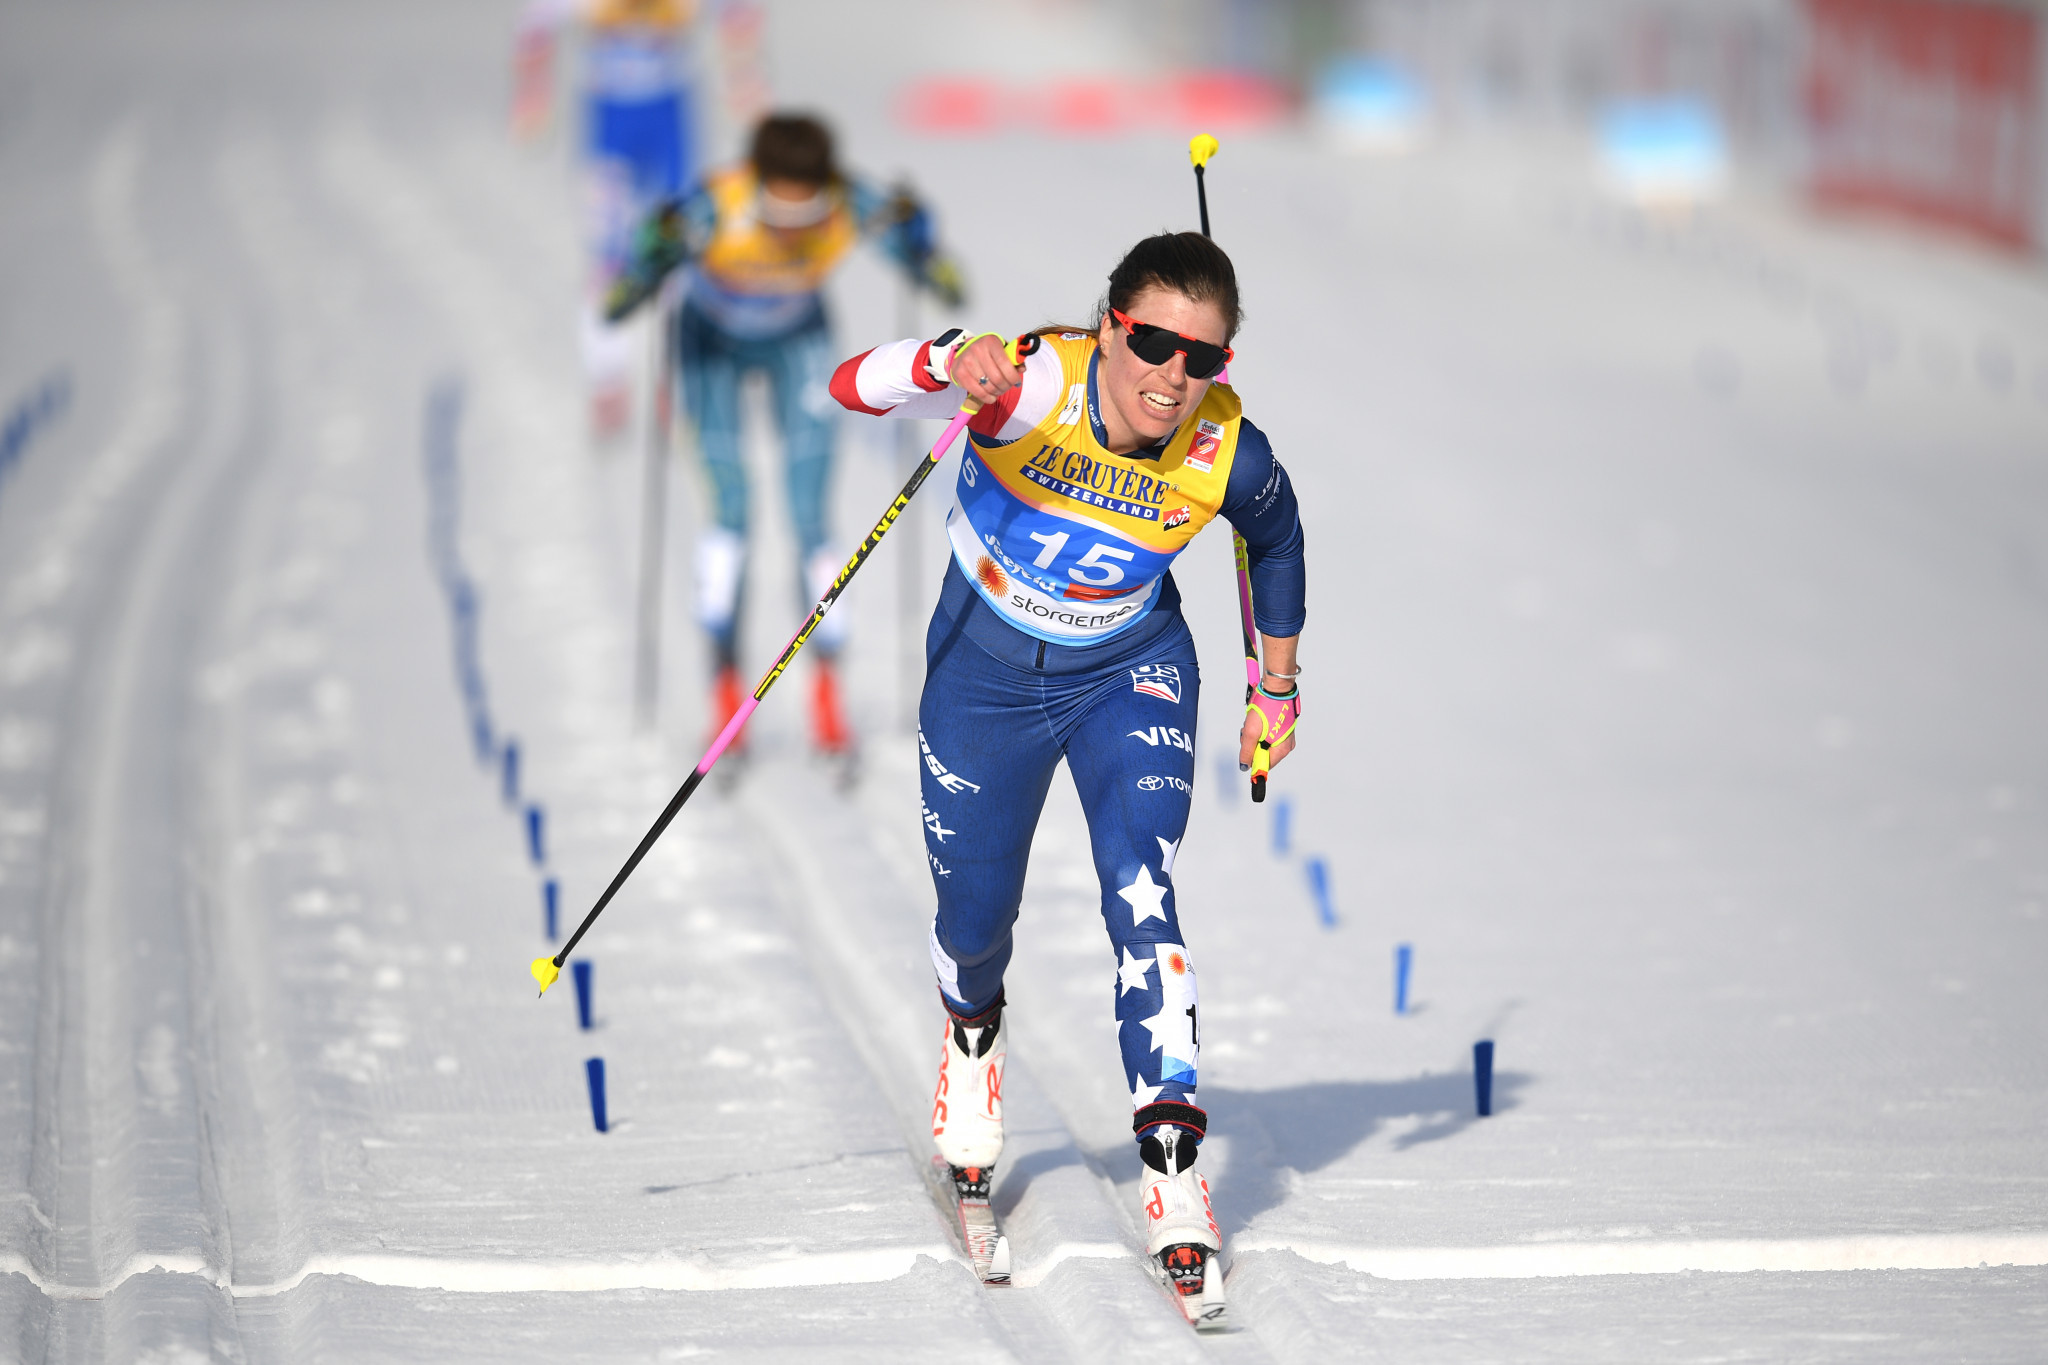 Rosie Brennan won her first World Cup race in Davos ©Getty Images